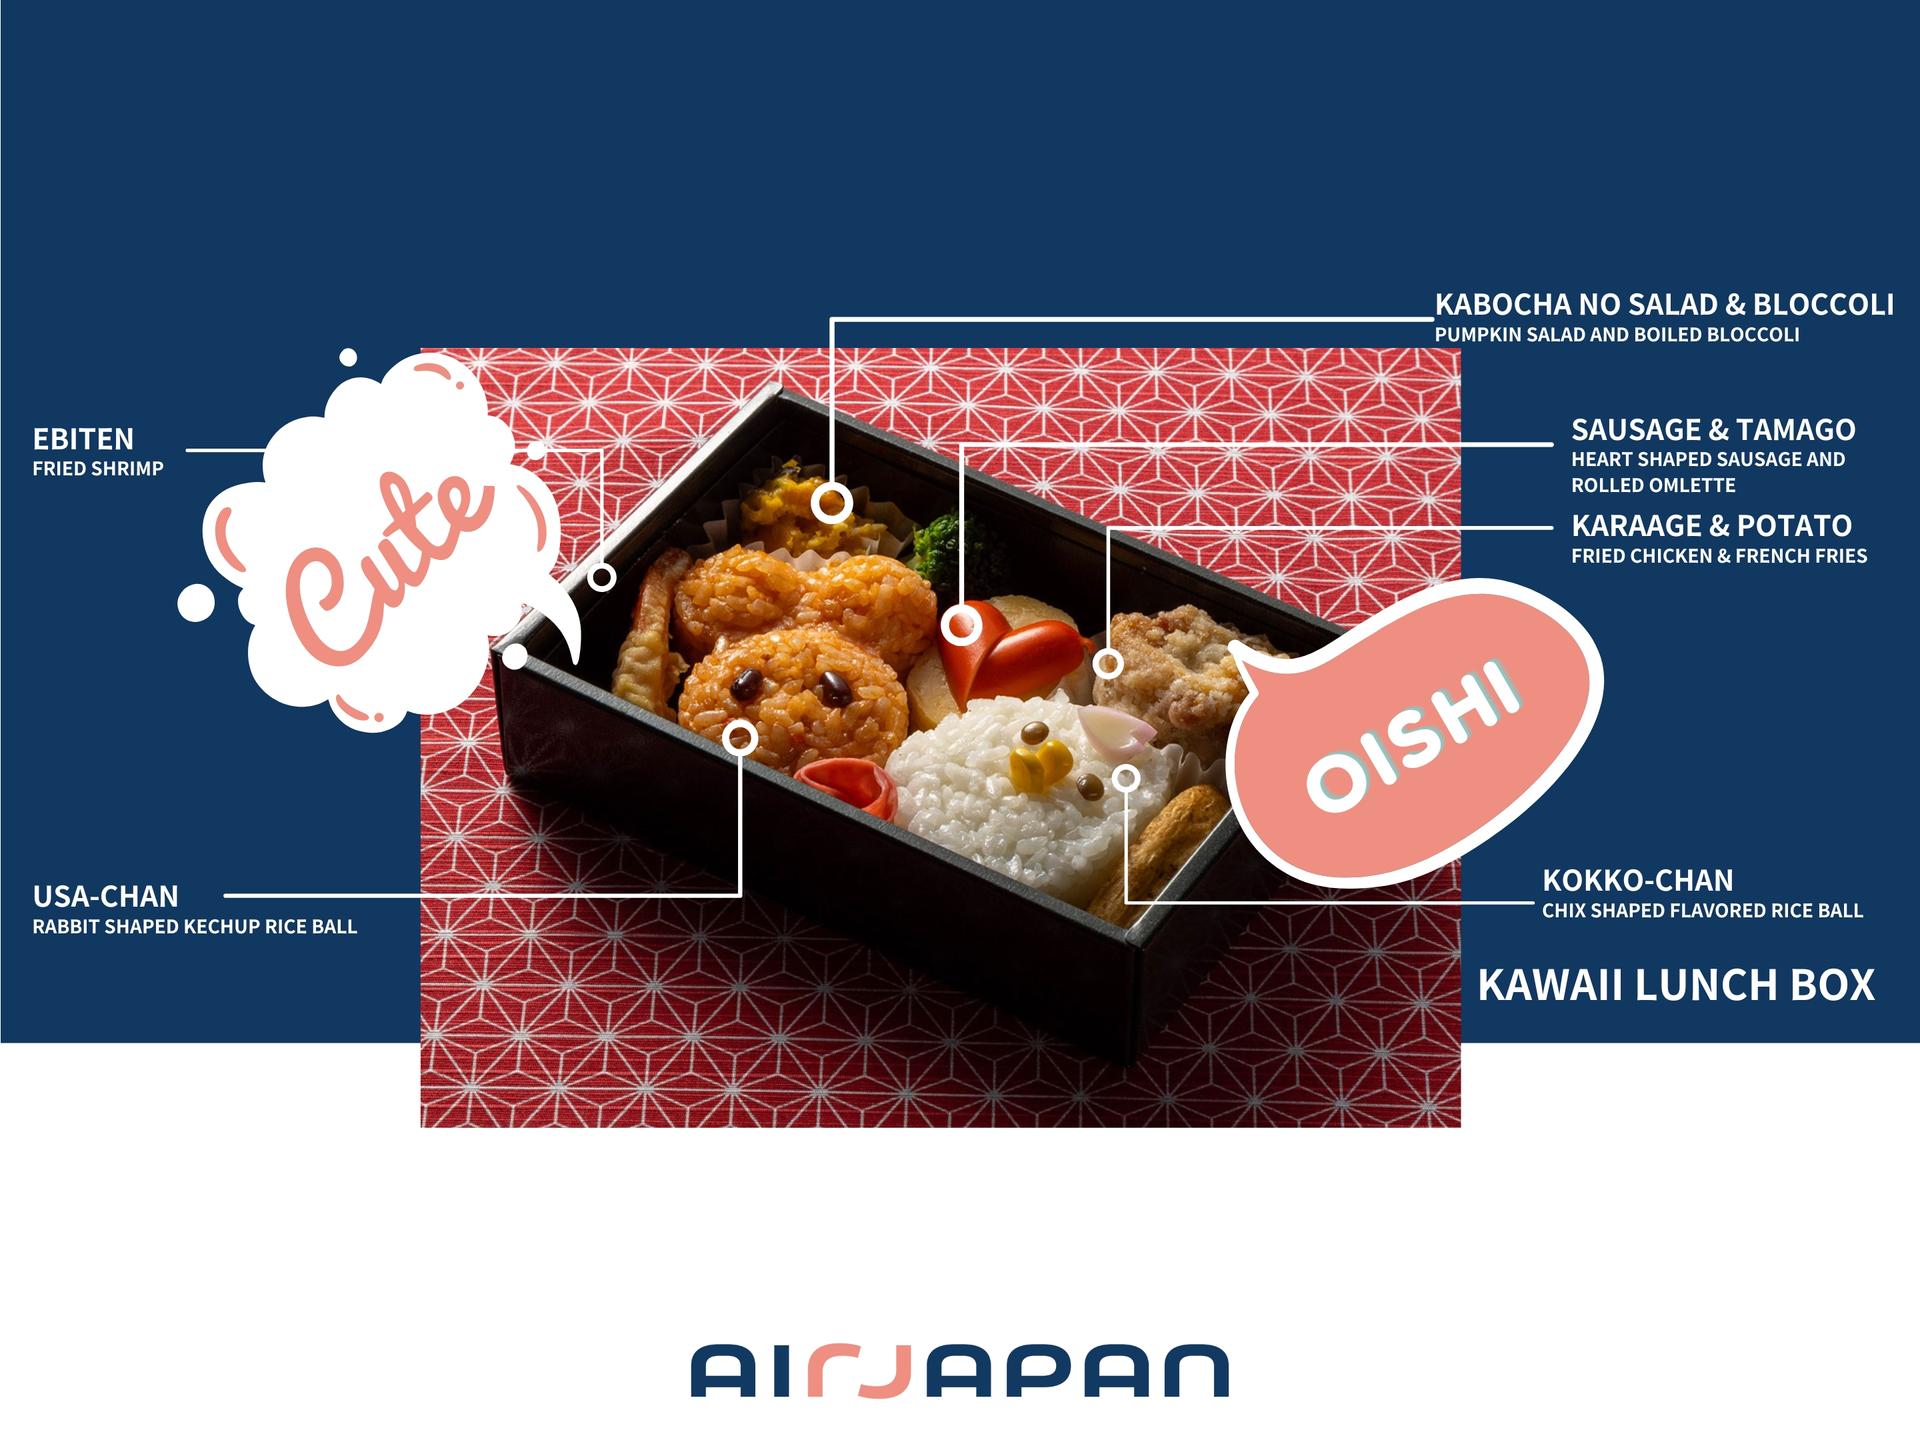 "Kawaii Lunch Box" from pre-purchase menu is now on sale!